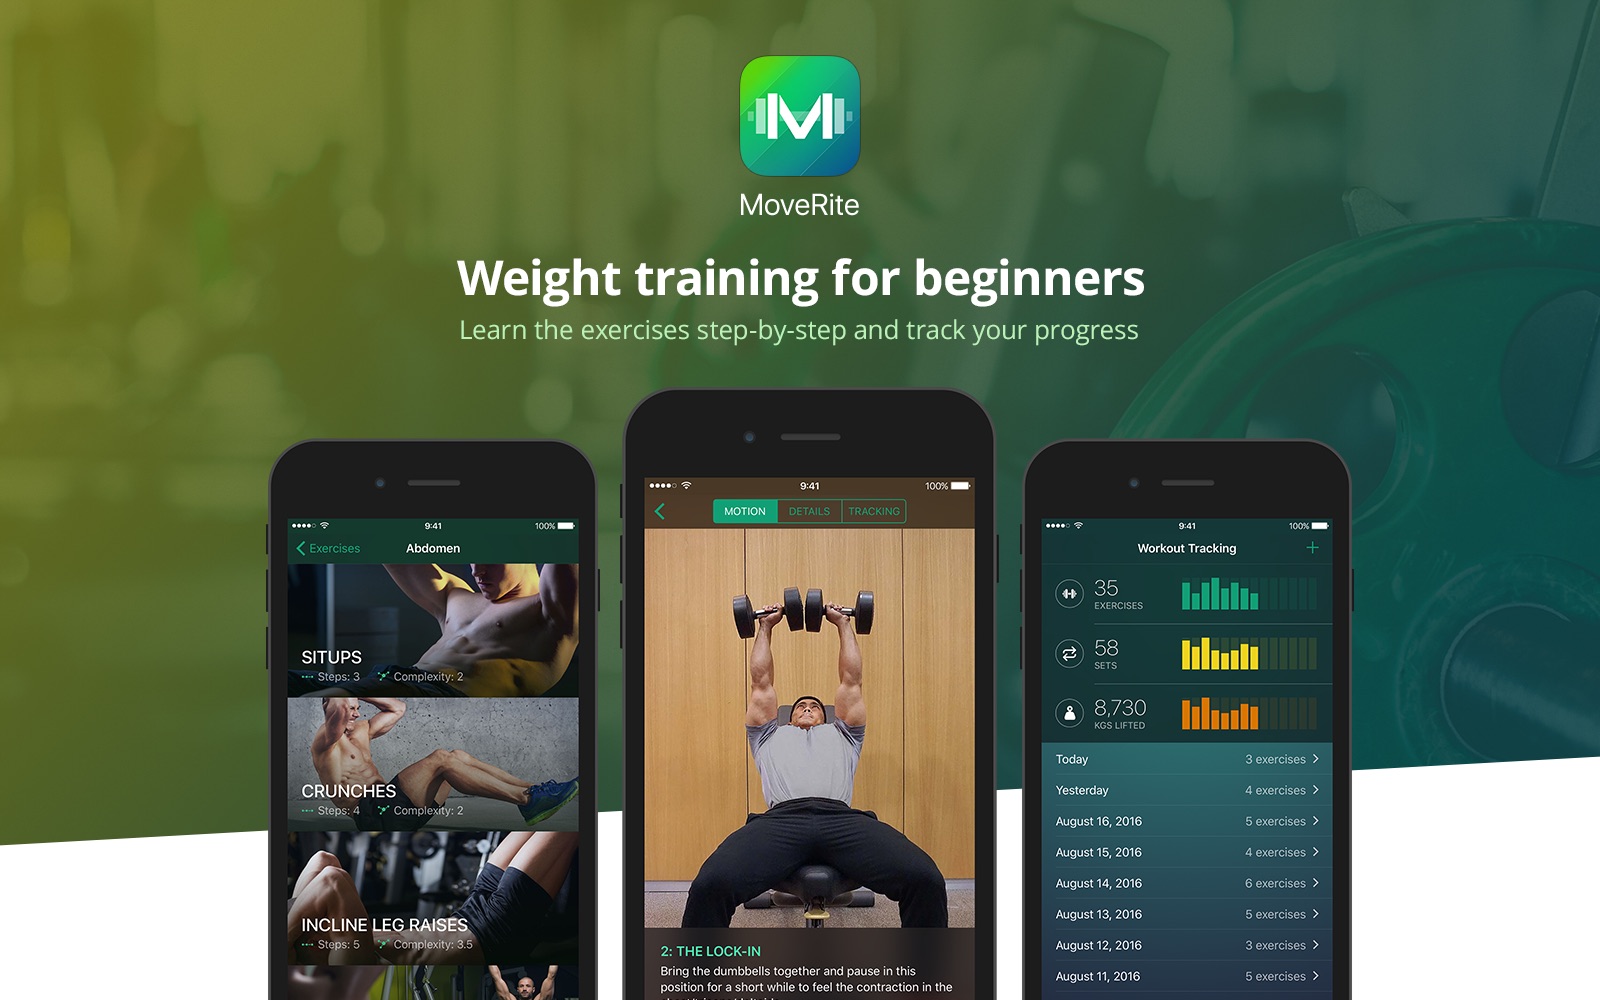 Weight training for beginners by MoveRite